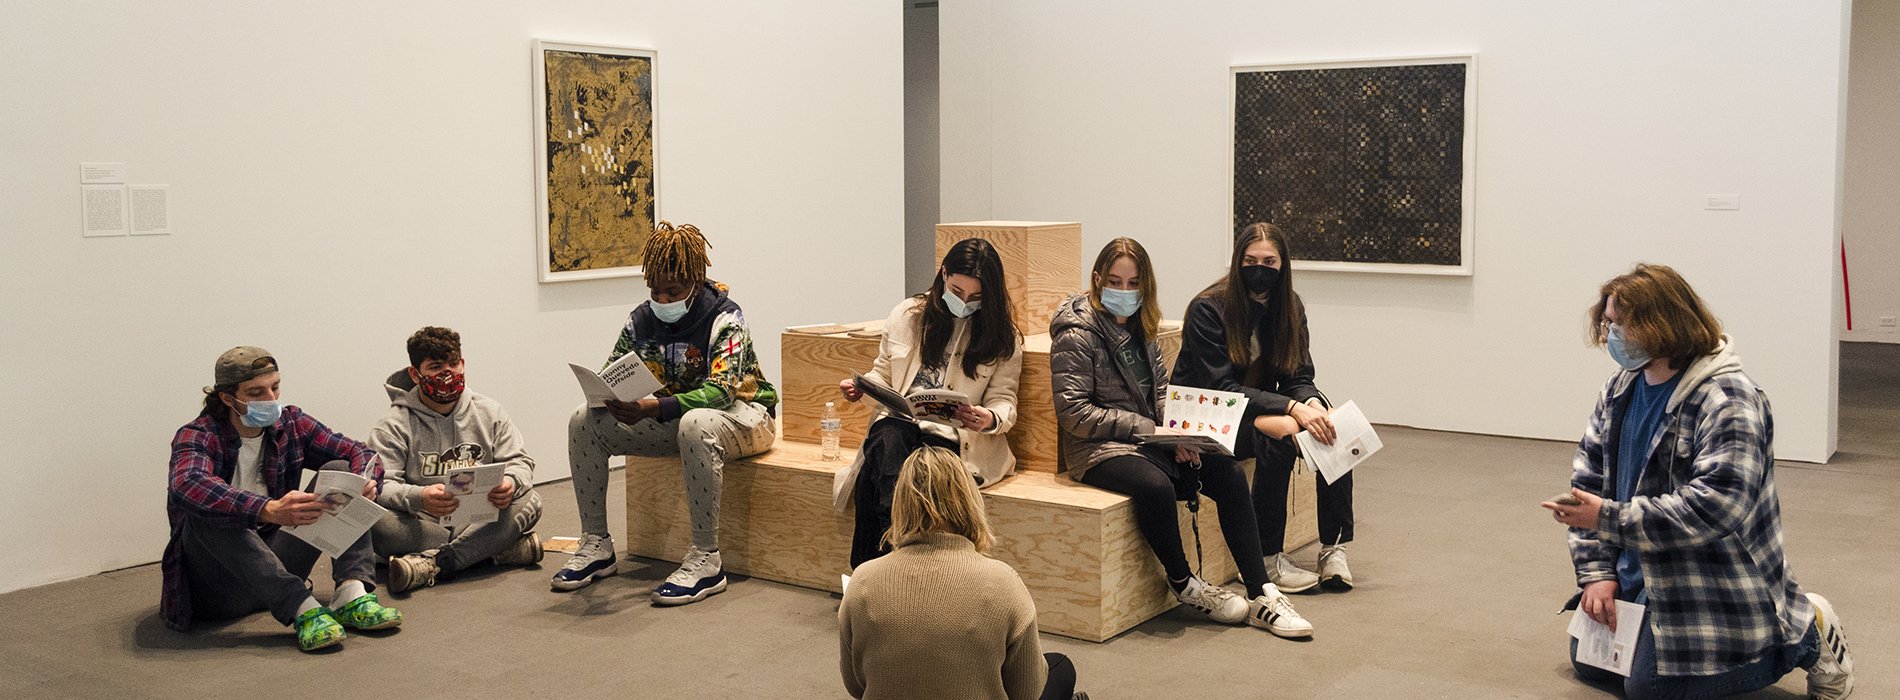 Masked students sitting on a plywood pyramid sculpture